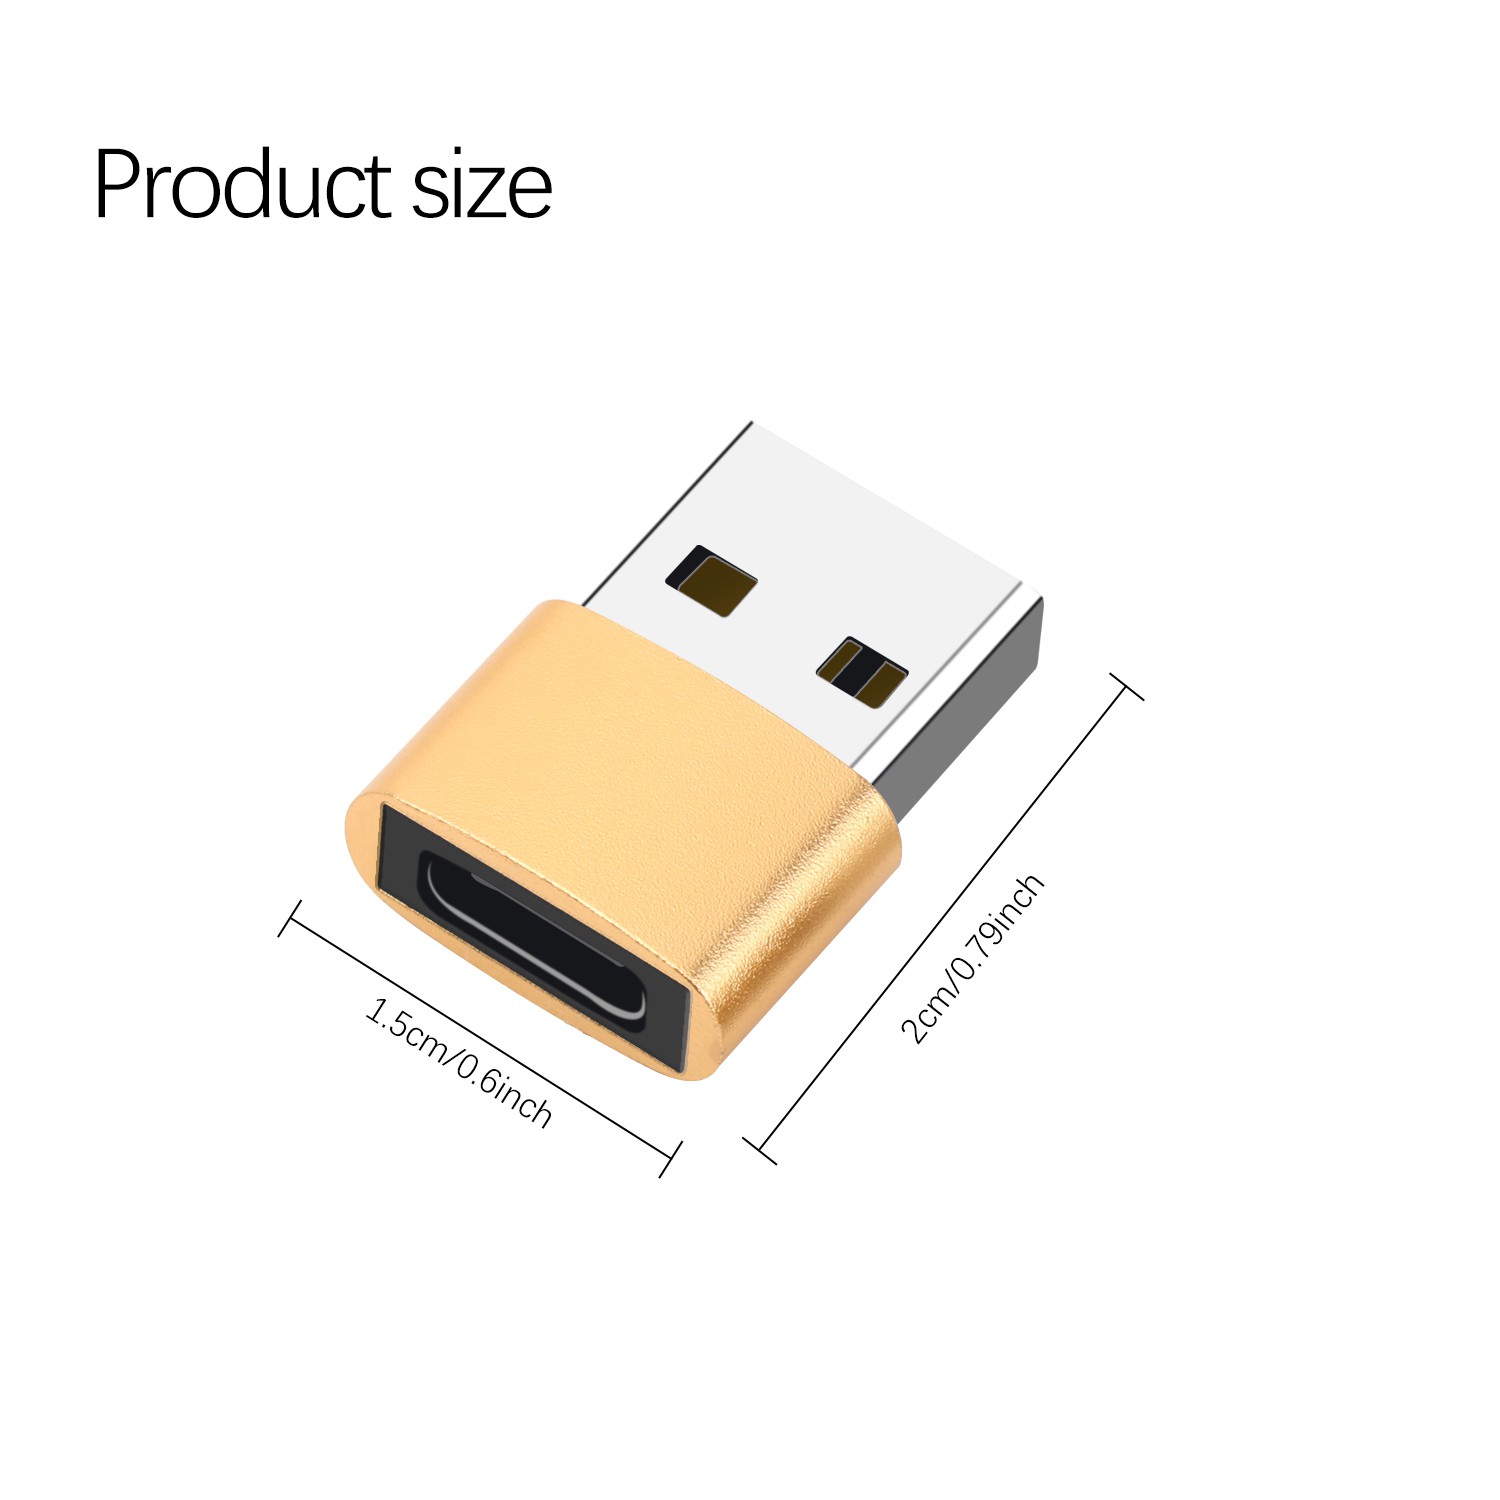 MYRON Male Usb-c to Usb Adapter Female Type c Usbc Connector Lightning Simply Safe Charger Syntech Power Converter/Multicolor